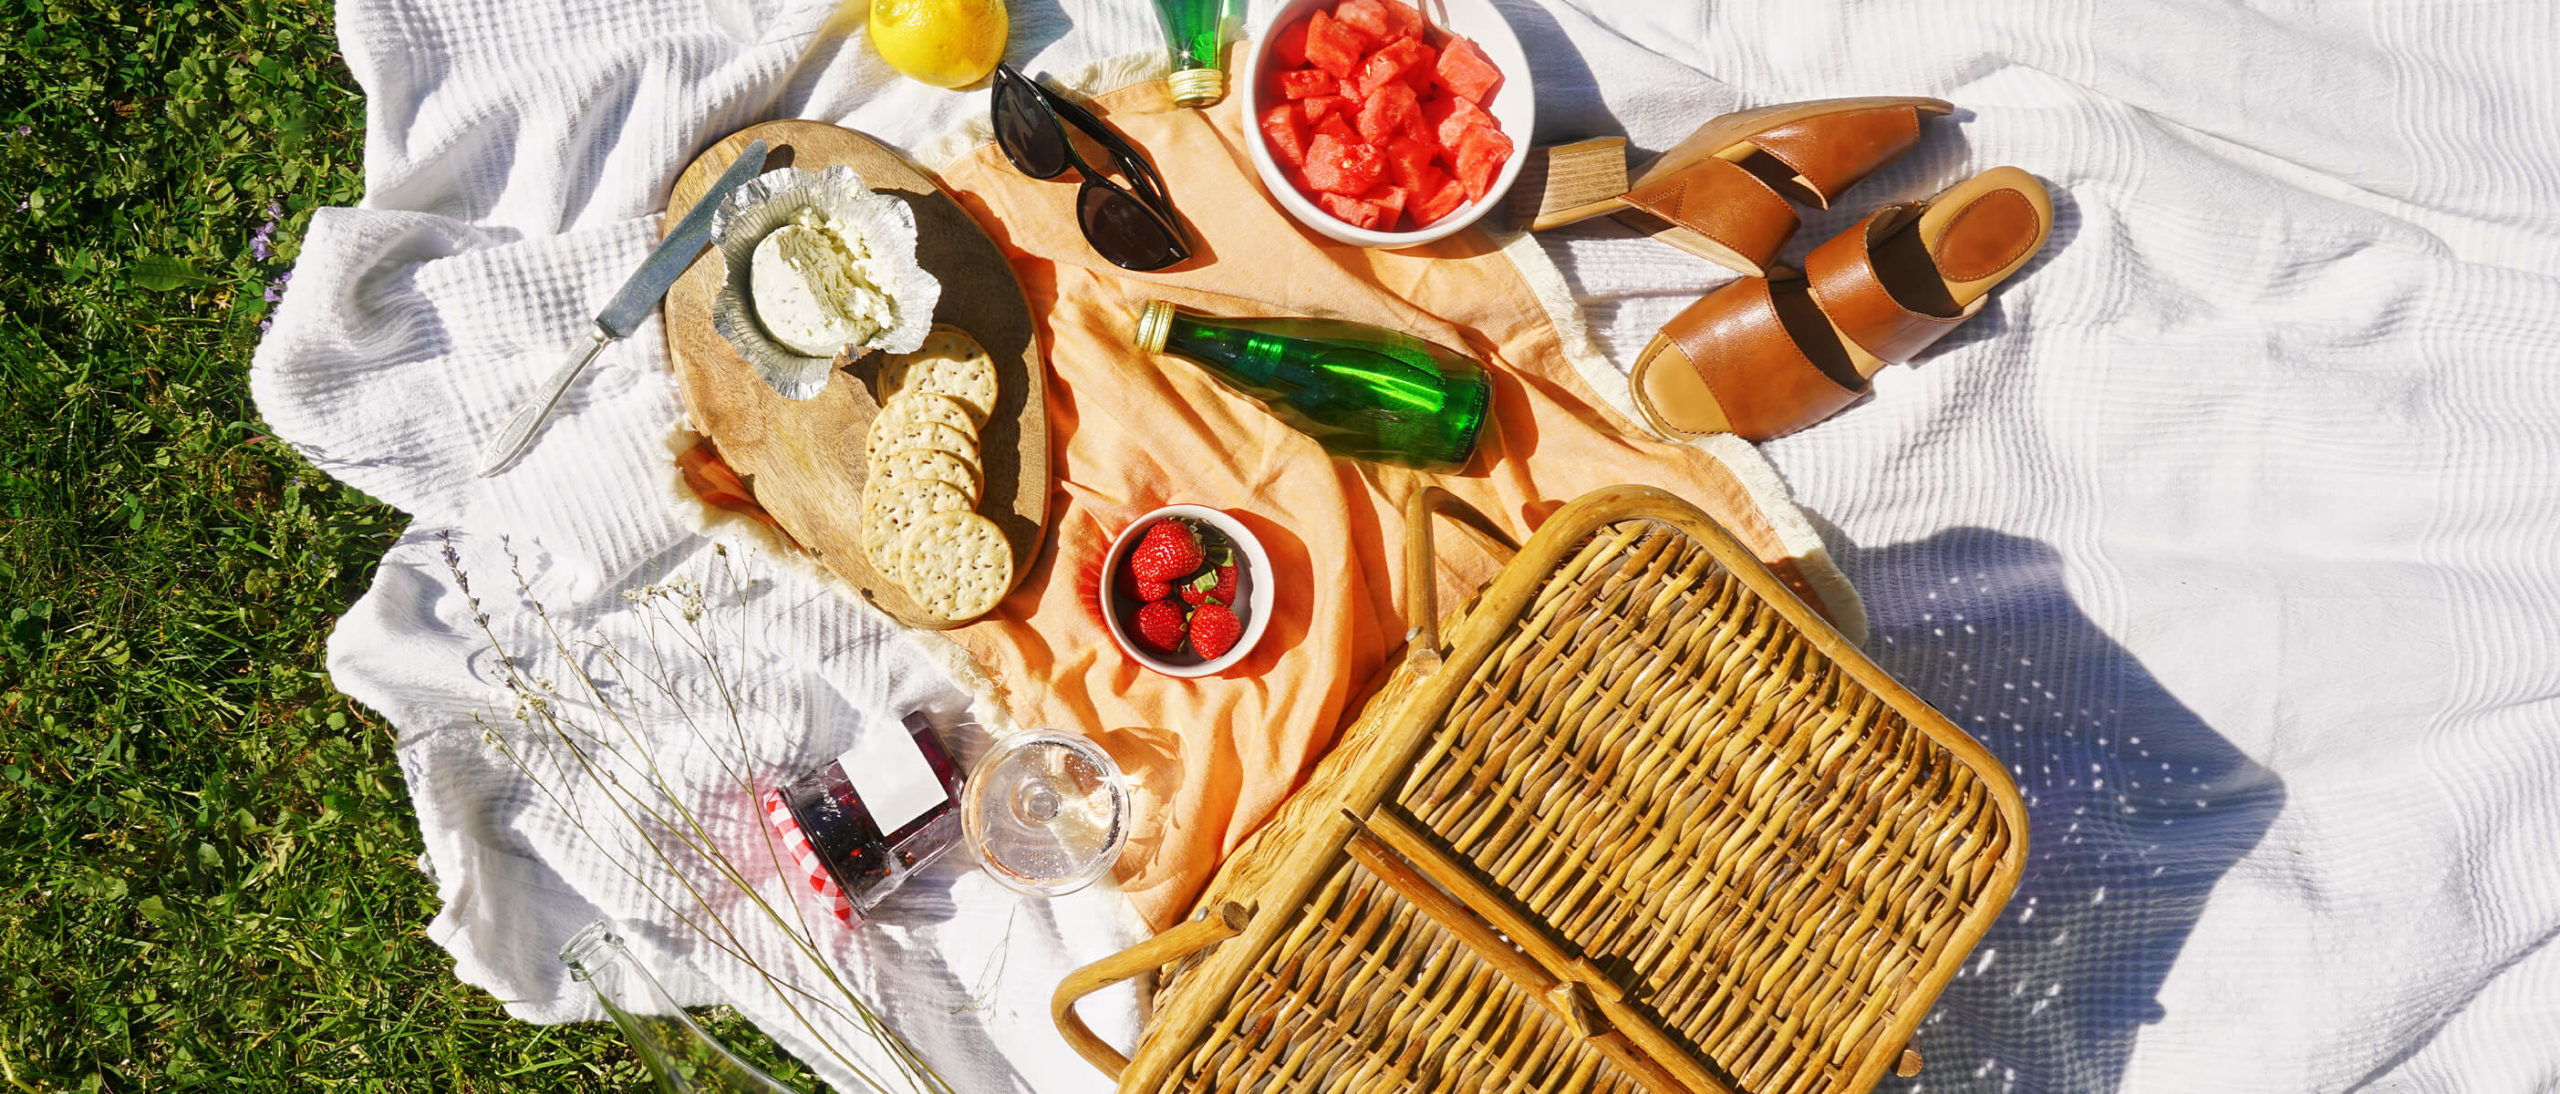 How to Host a Restaurant-Themed Picnic on a Budget